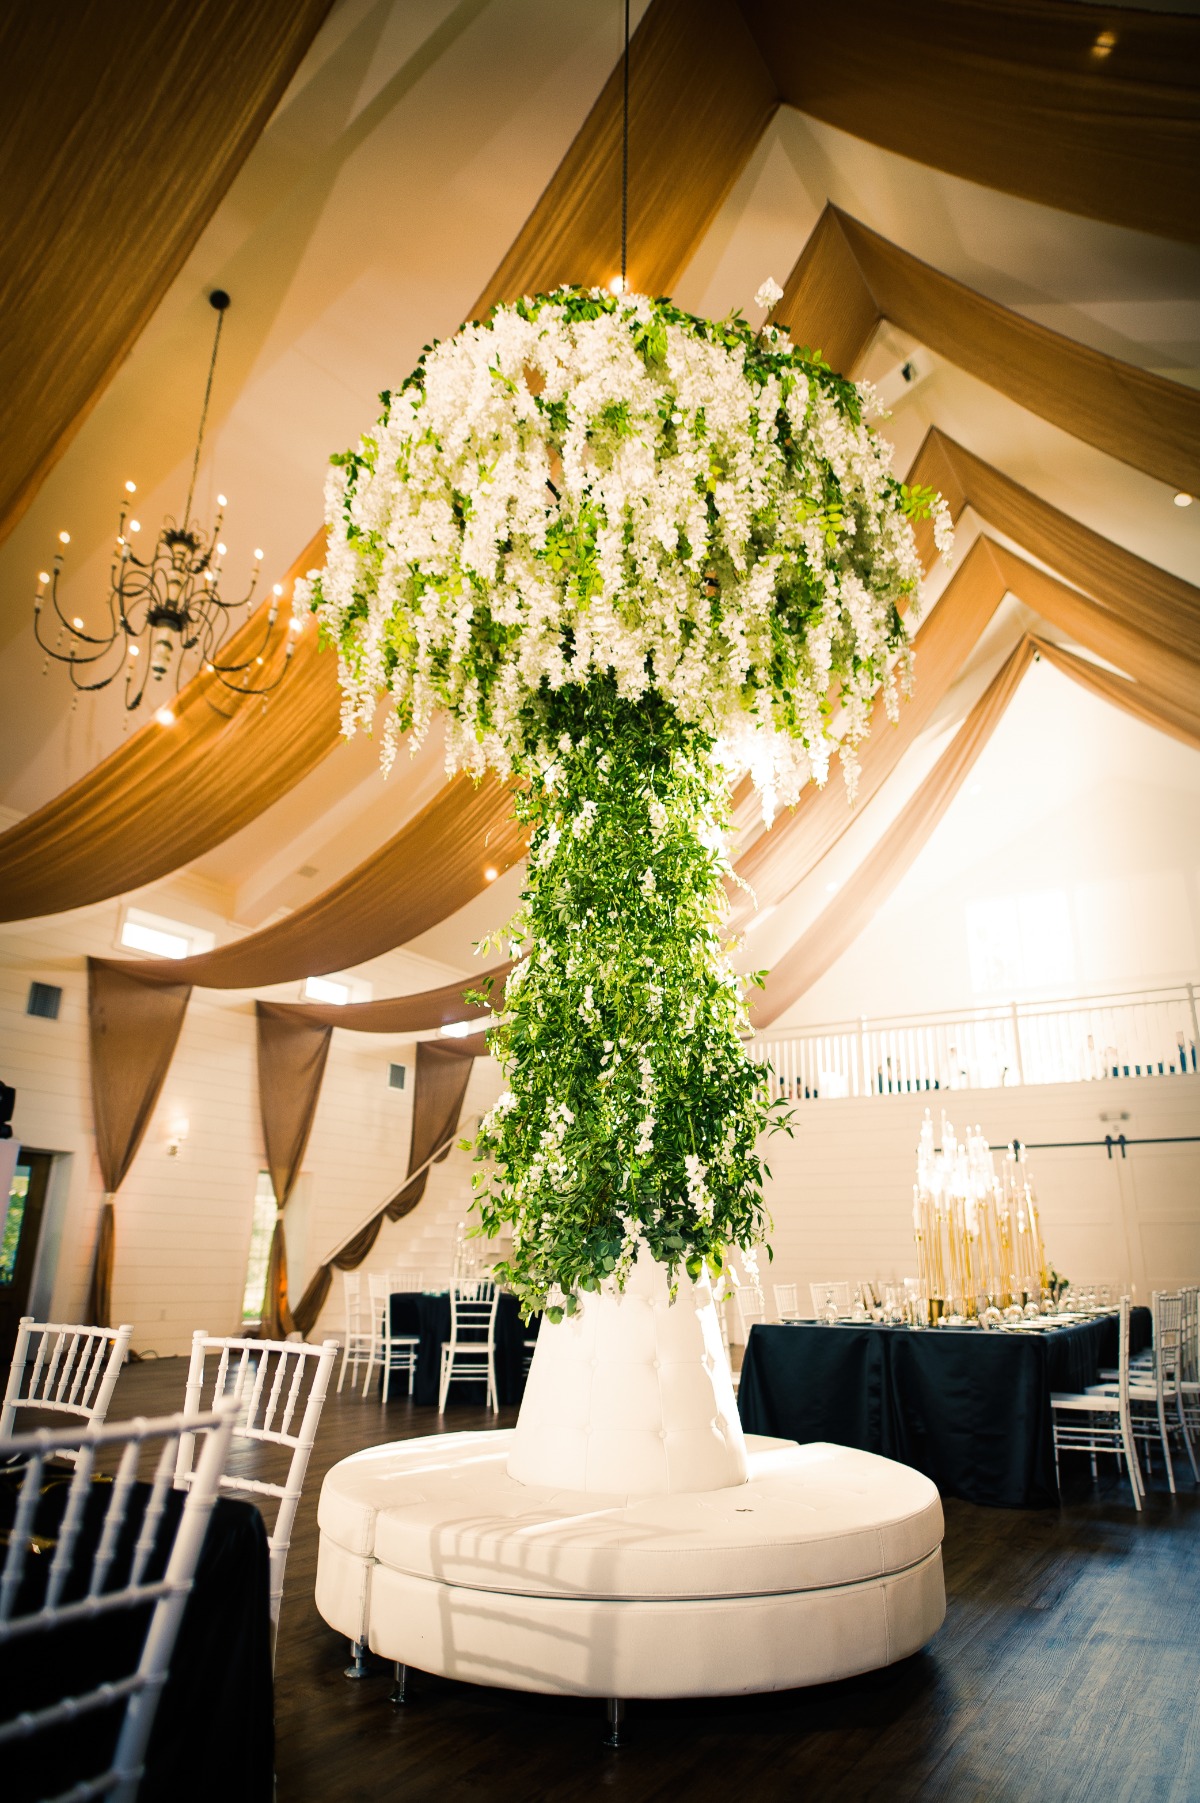 A Grand Reception With A Giant Floral Chandelier That Almost Touched The Floor